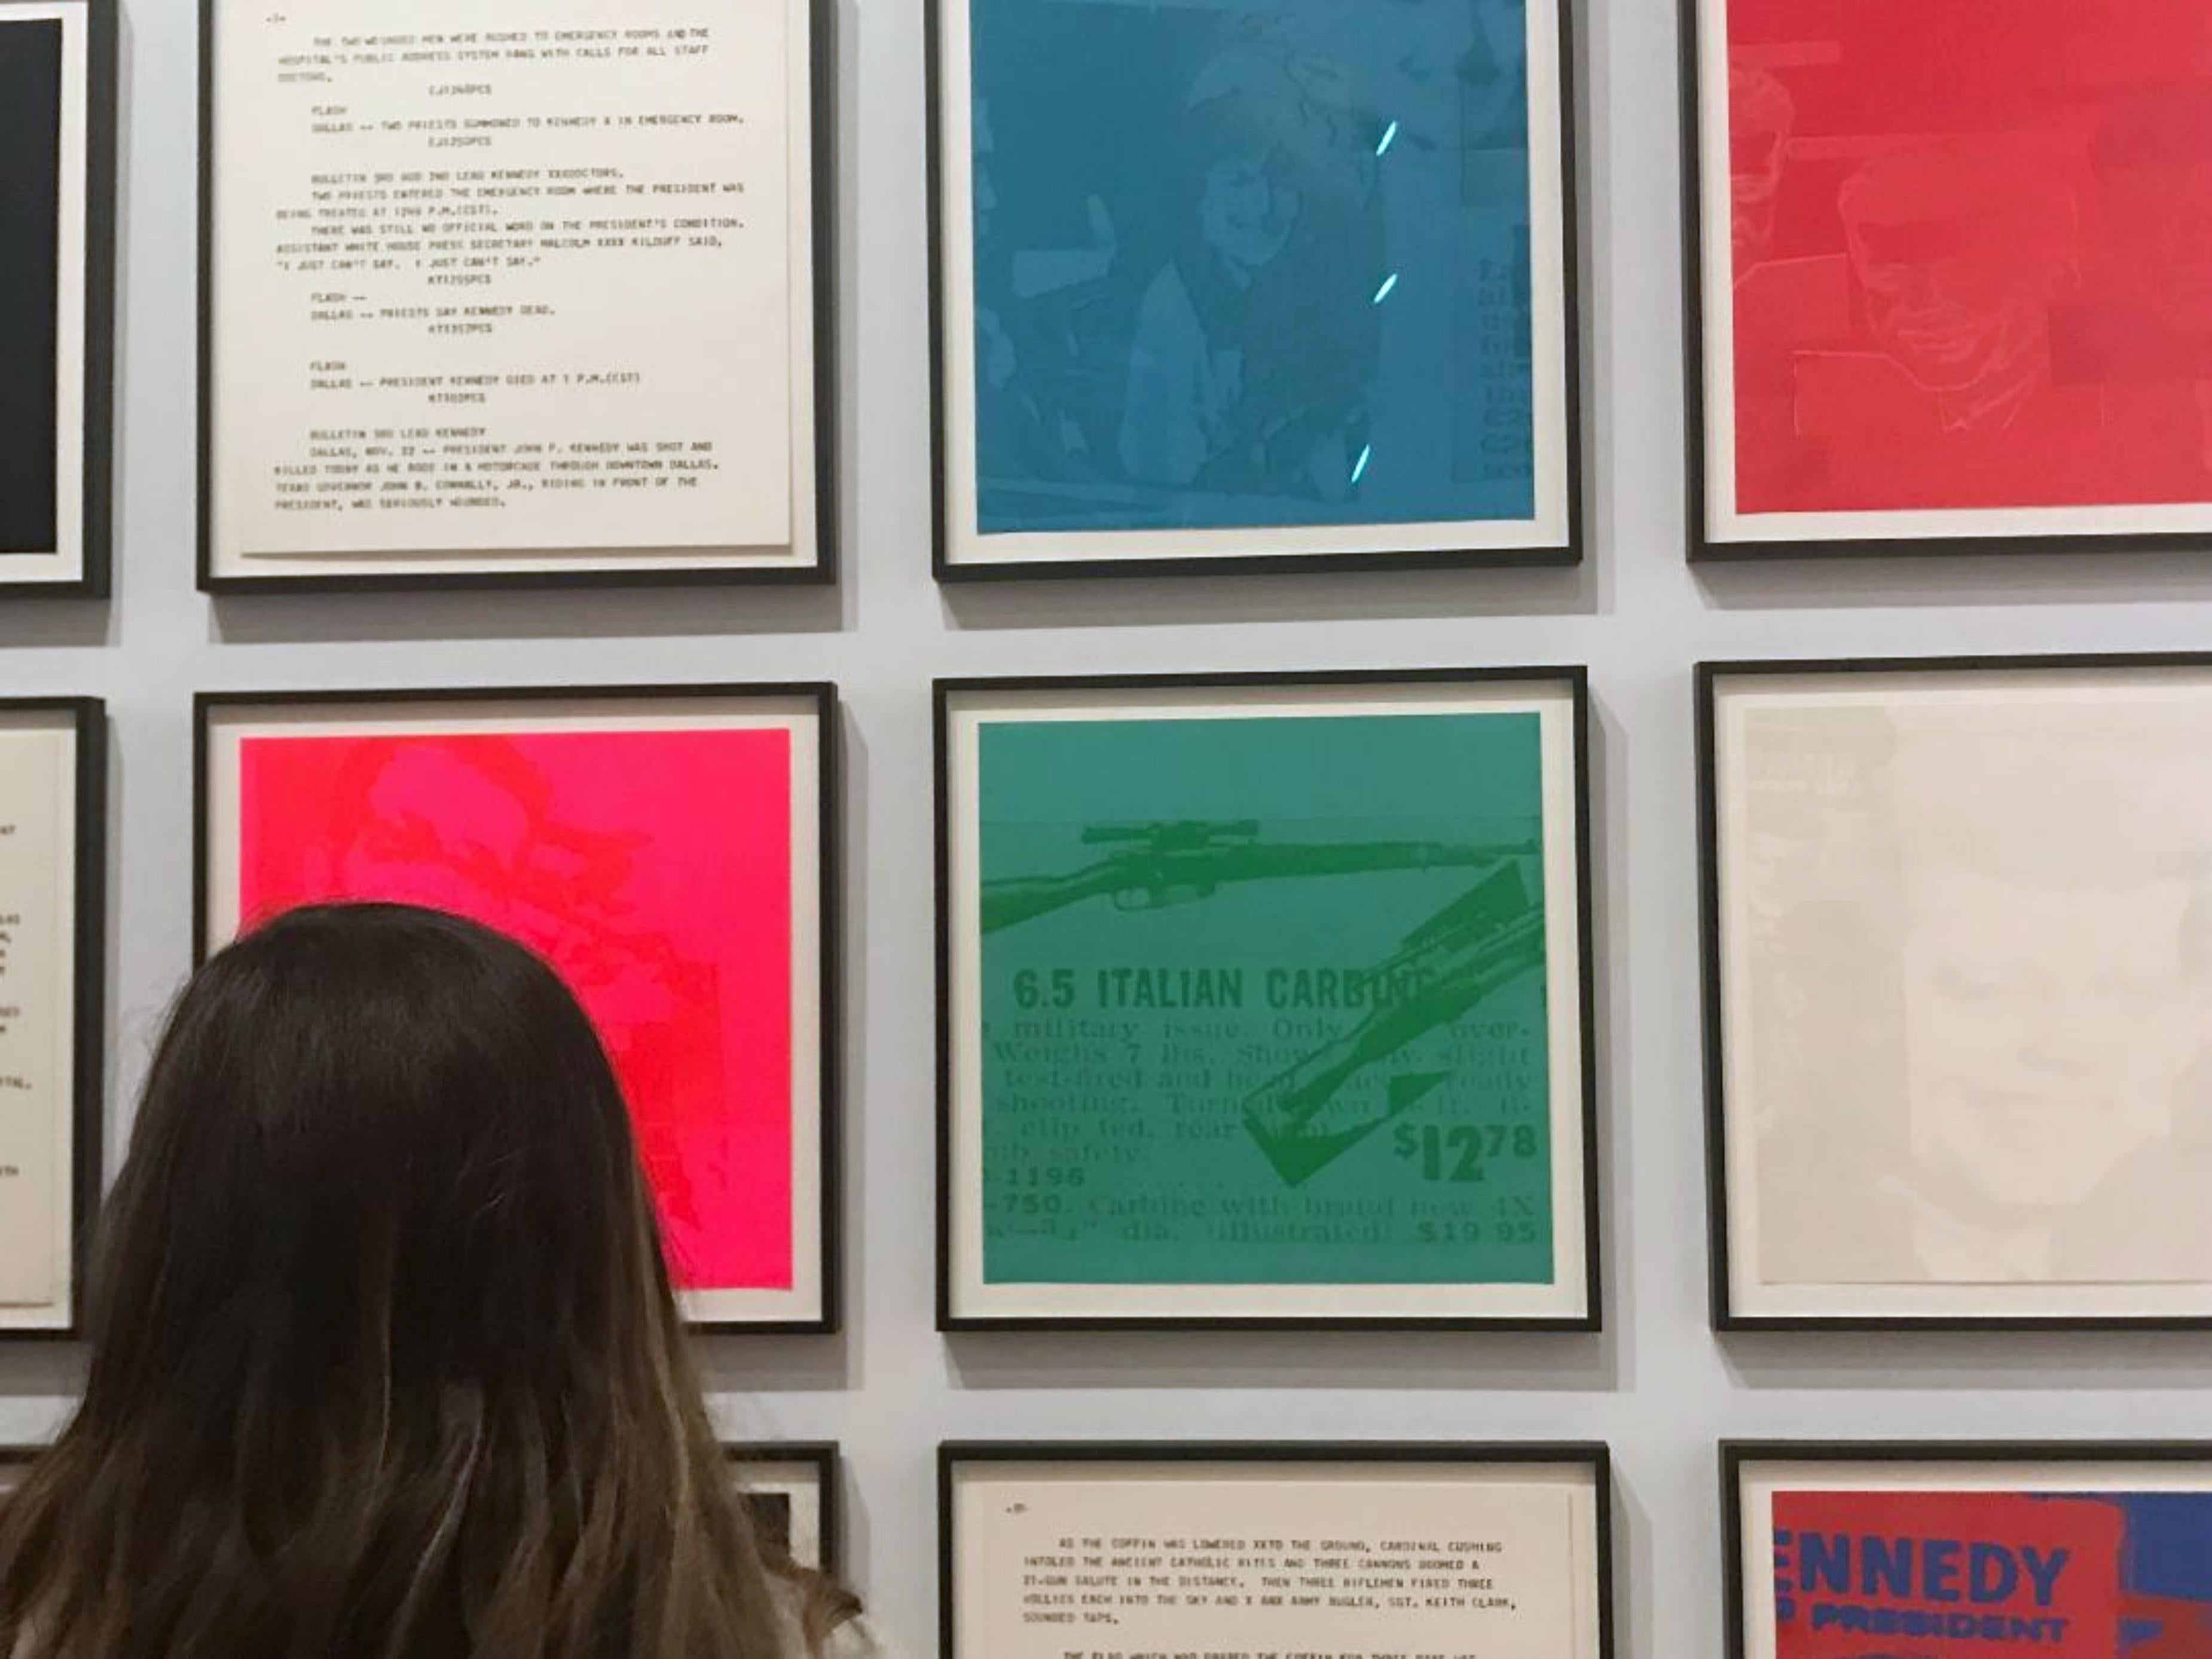 Andy Warhol
Flash portfolio colophon pages, JFK Assassination, 1968
2 Separate Silkscreens: (1) Silkscreen text on paper and teletype text; (2) colophon sheet in pencil and numbered XVII by Andy Warhol
Hand-signed by artist, two silkscreen prints;